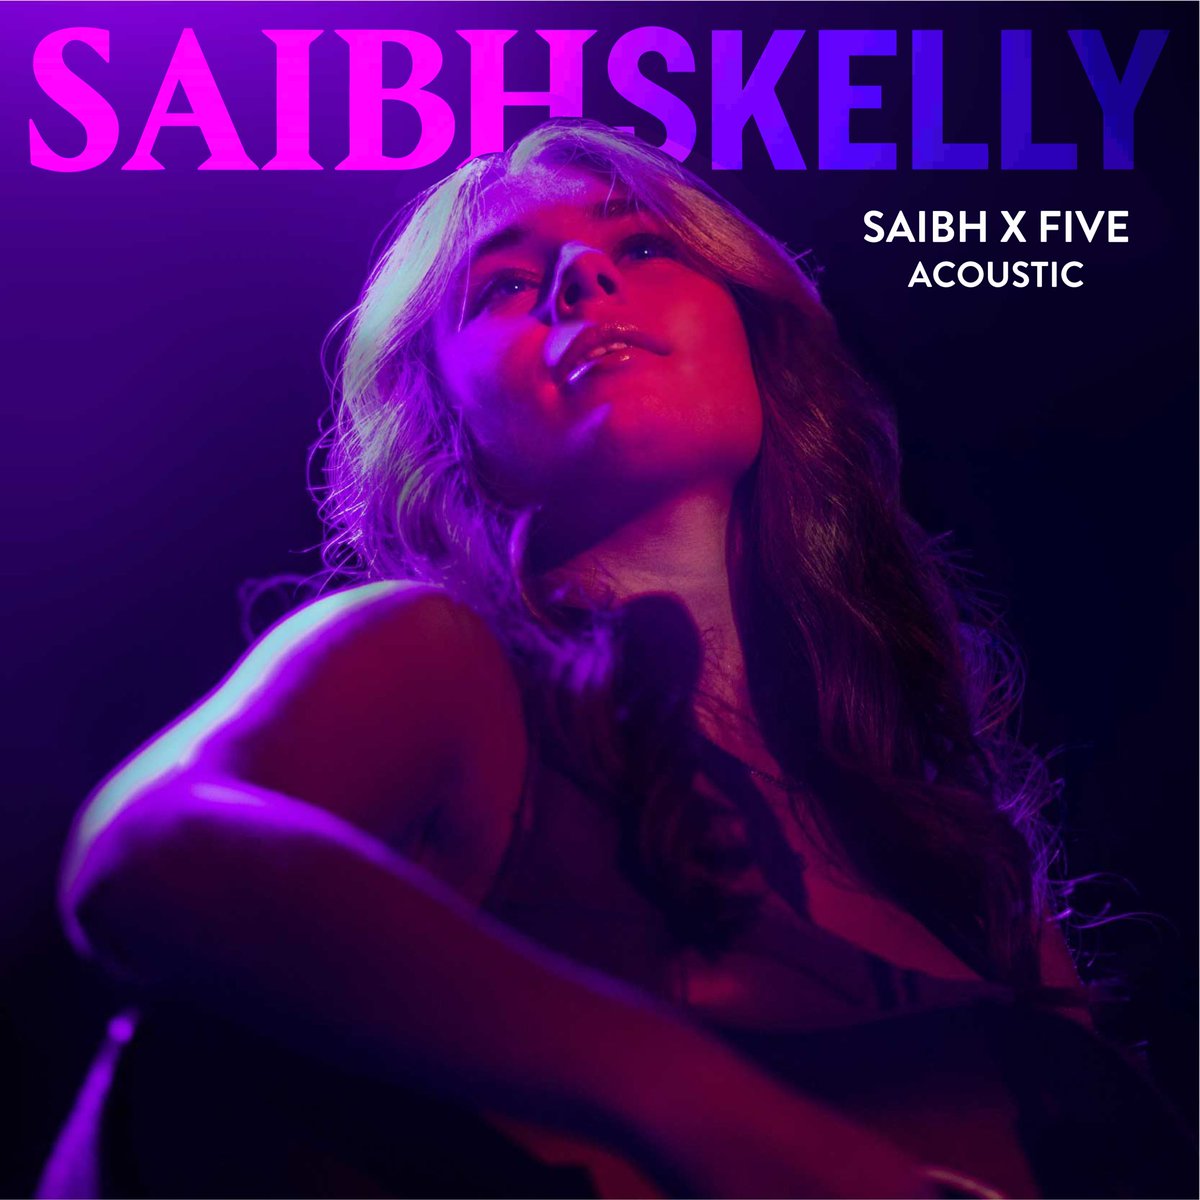 Acoustic EP out now x saibhskelly.ffm.to/saibhxfive